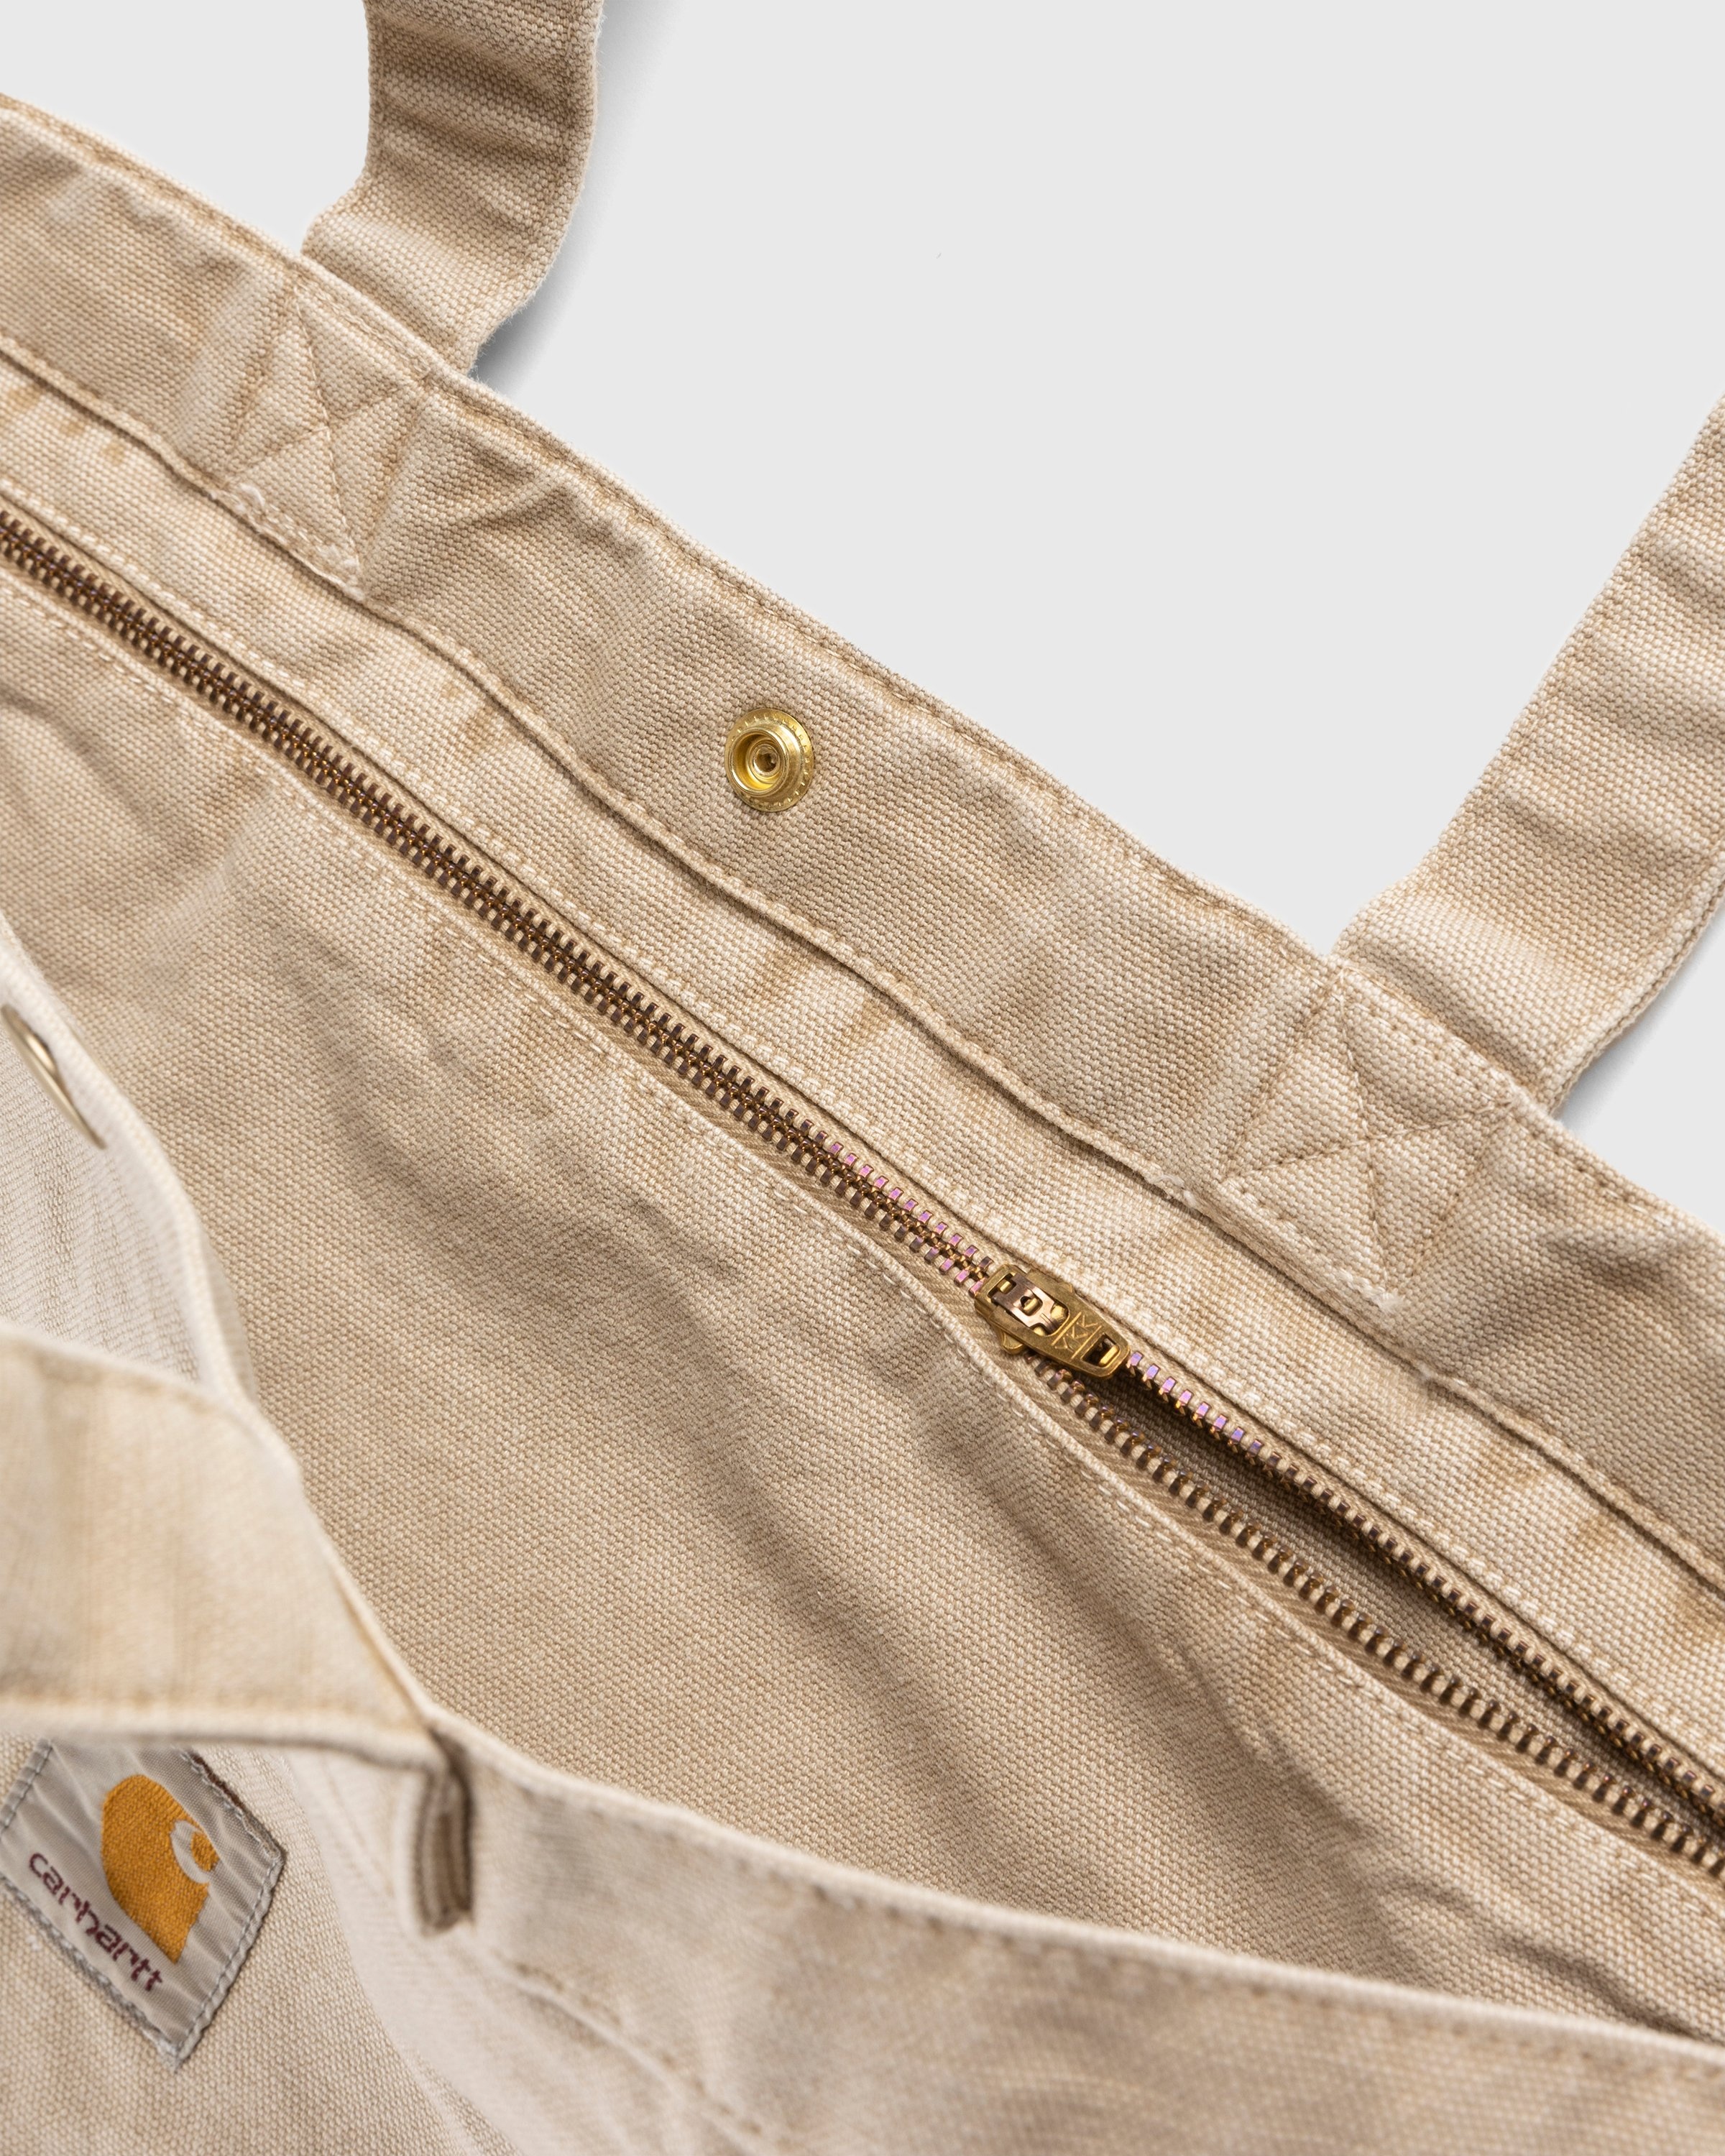 Carhartt WIP – Large Bayfield Tote Dusty Hamilton Brown Faded